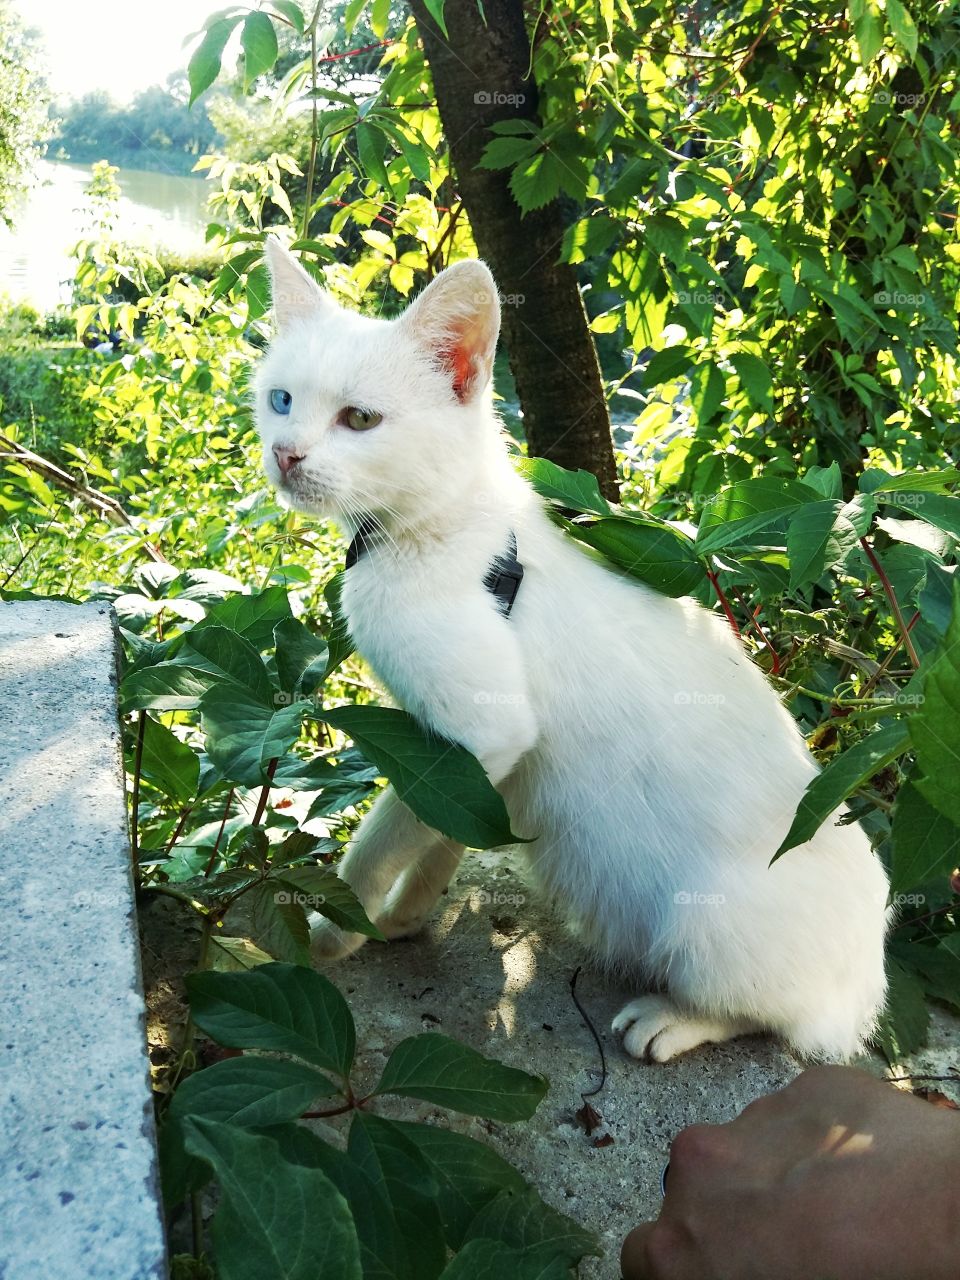 cat albino with different eyes